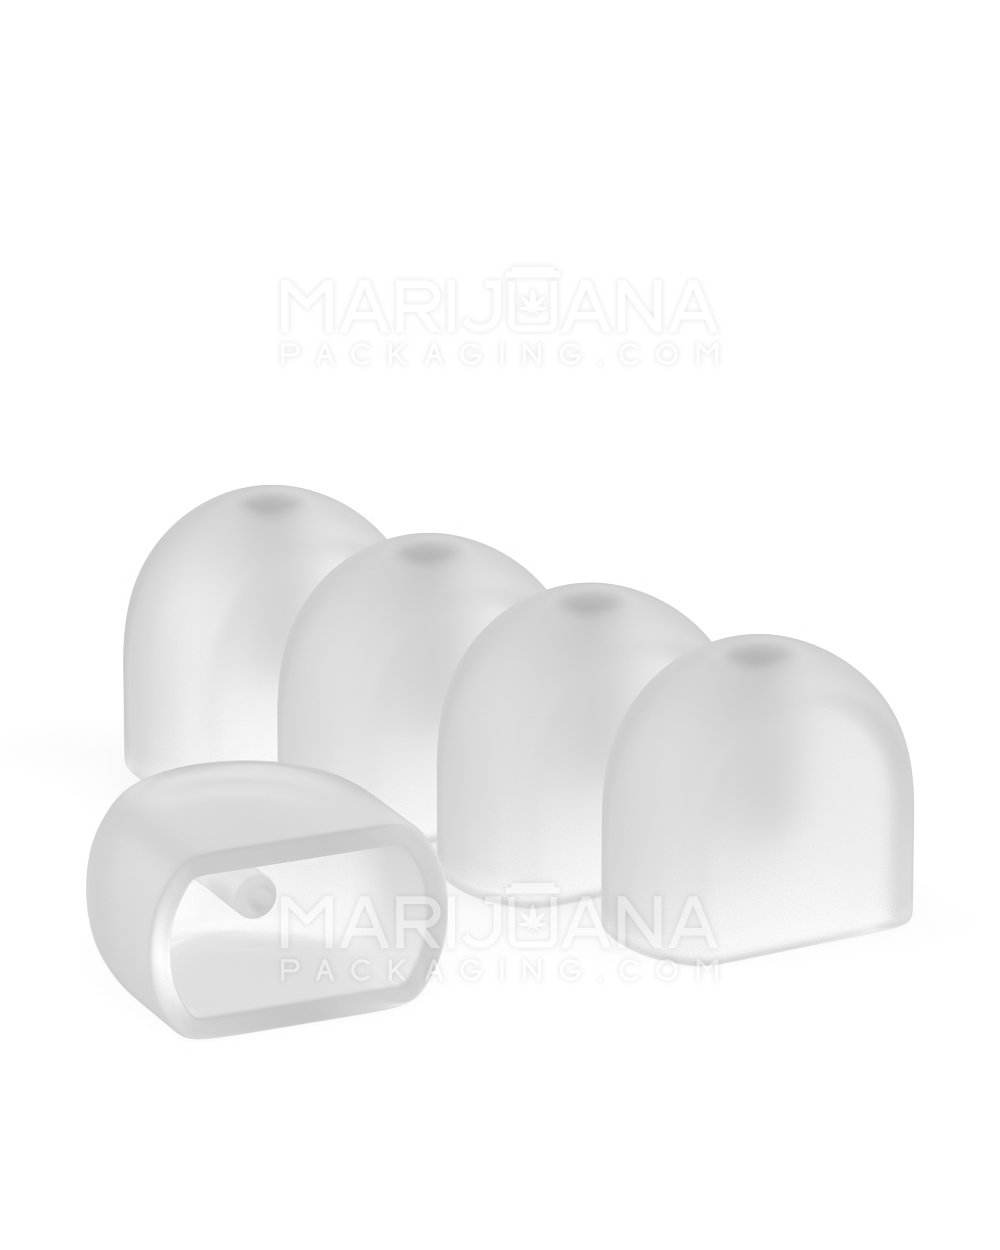 Dust Proof Cover for Flat Vape Cartridge Tips | Opaque White - Silicone - 500 Count - 6